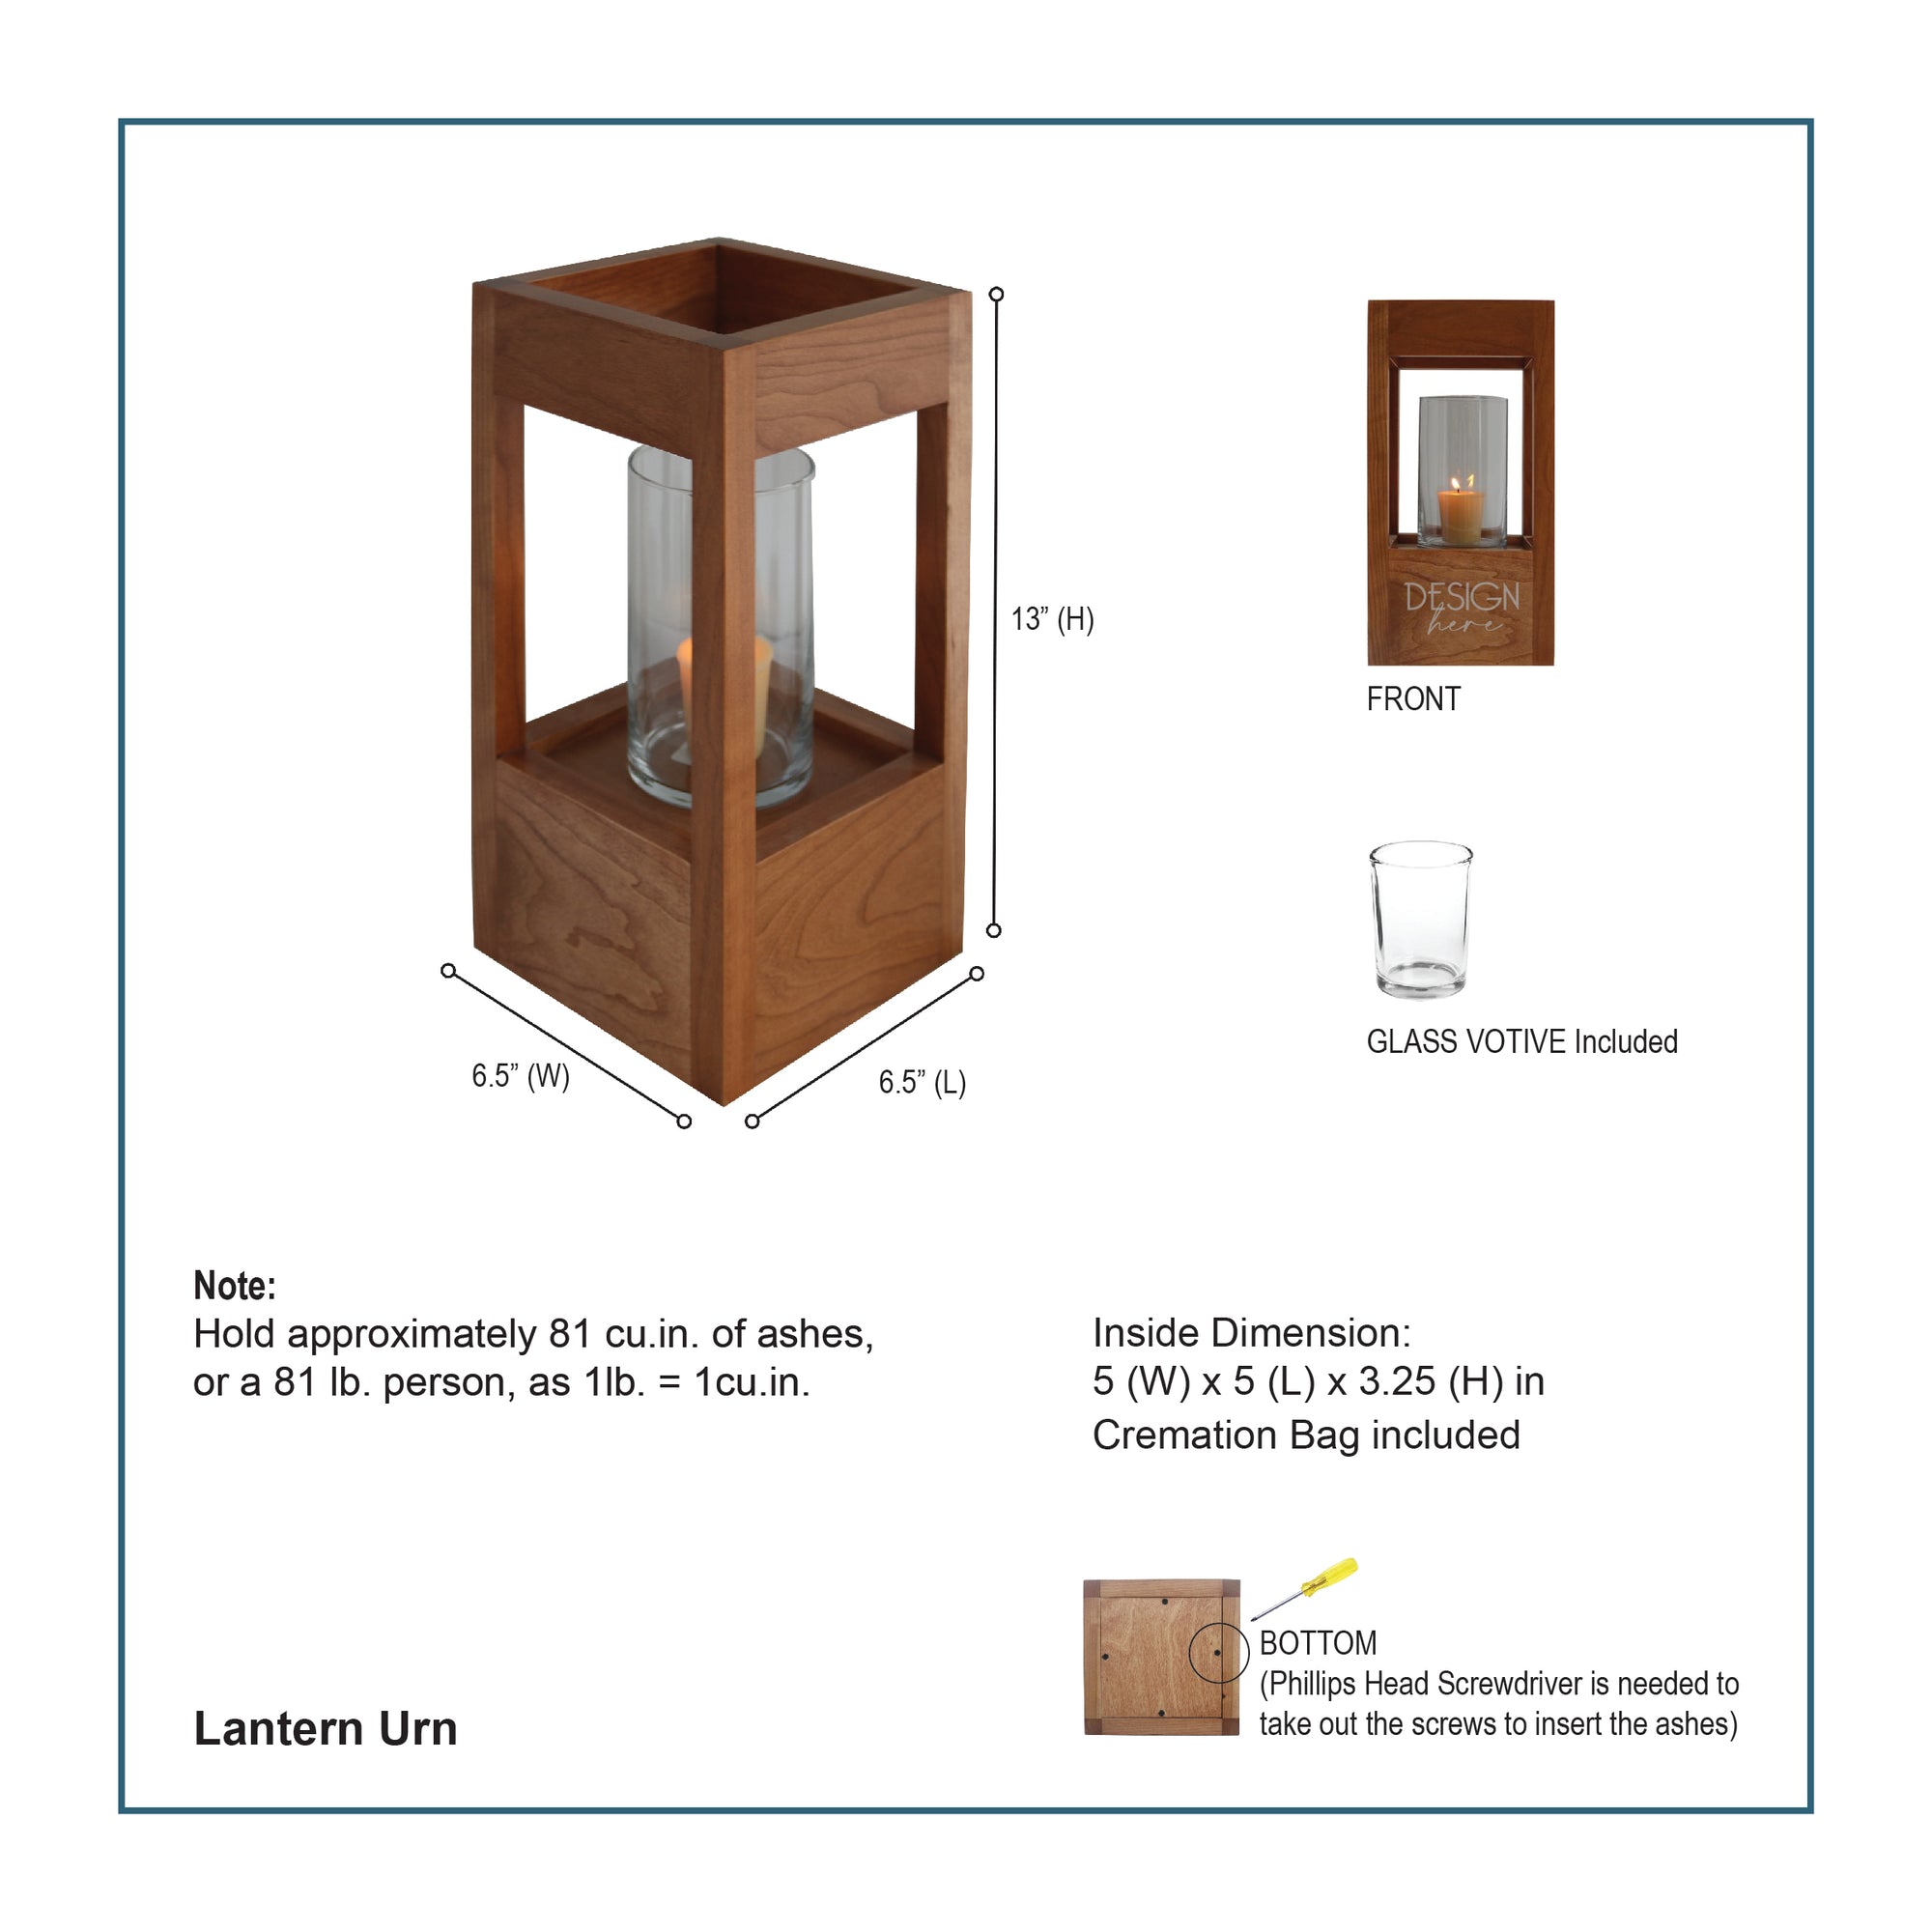 Wooden Lantern Cremation Urn For Adult Ashes holds 81 cu in - Because Someone We Love